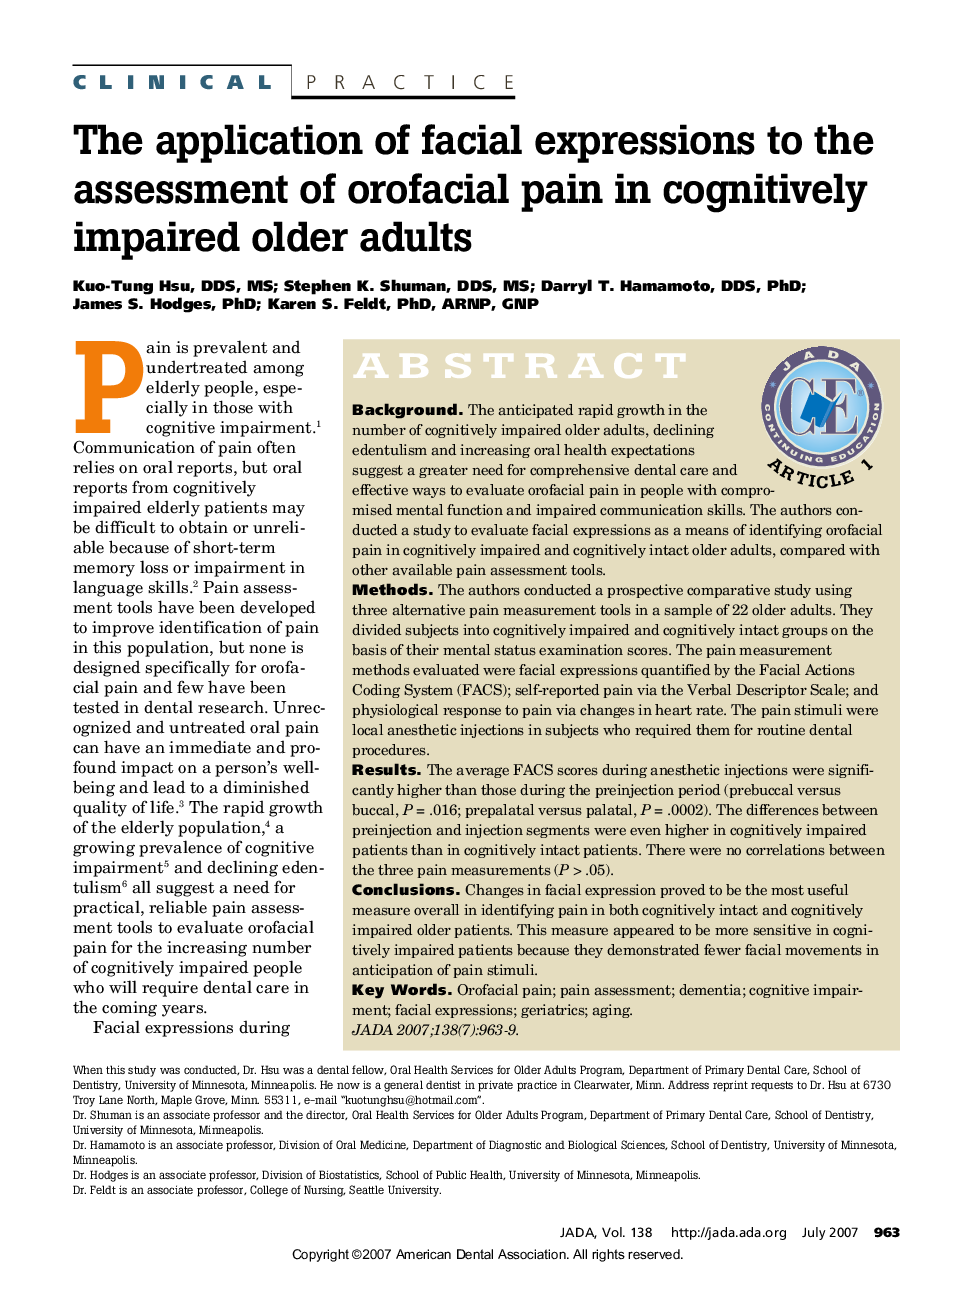 The application of facial expressions to the assessment of orofacial pain in cognitively impaired older adults 